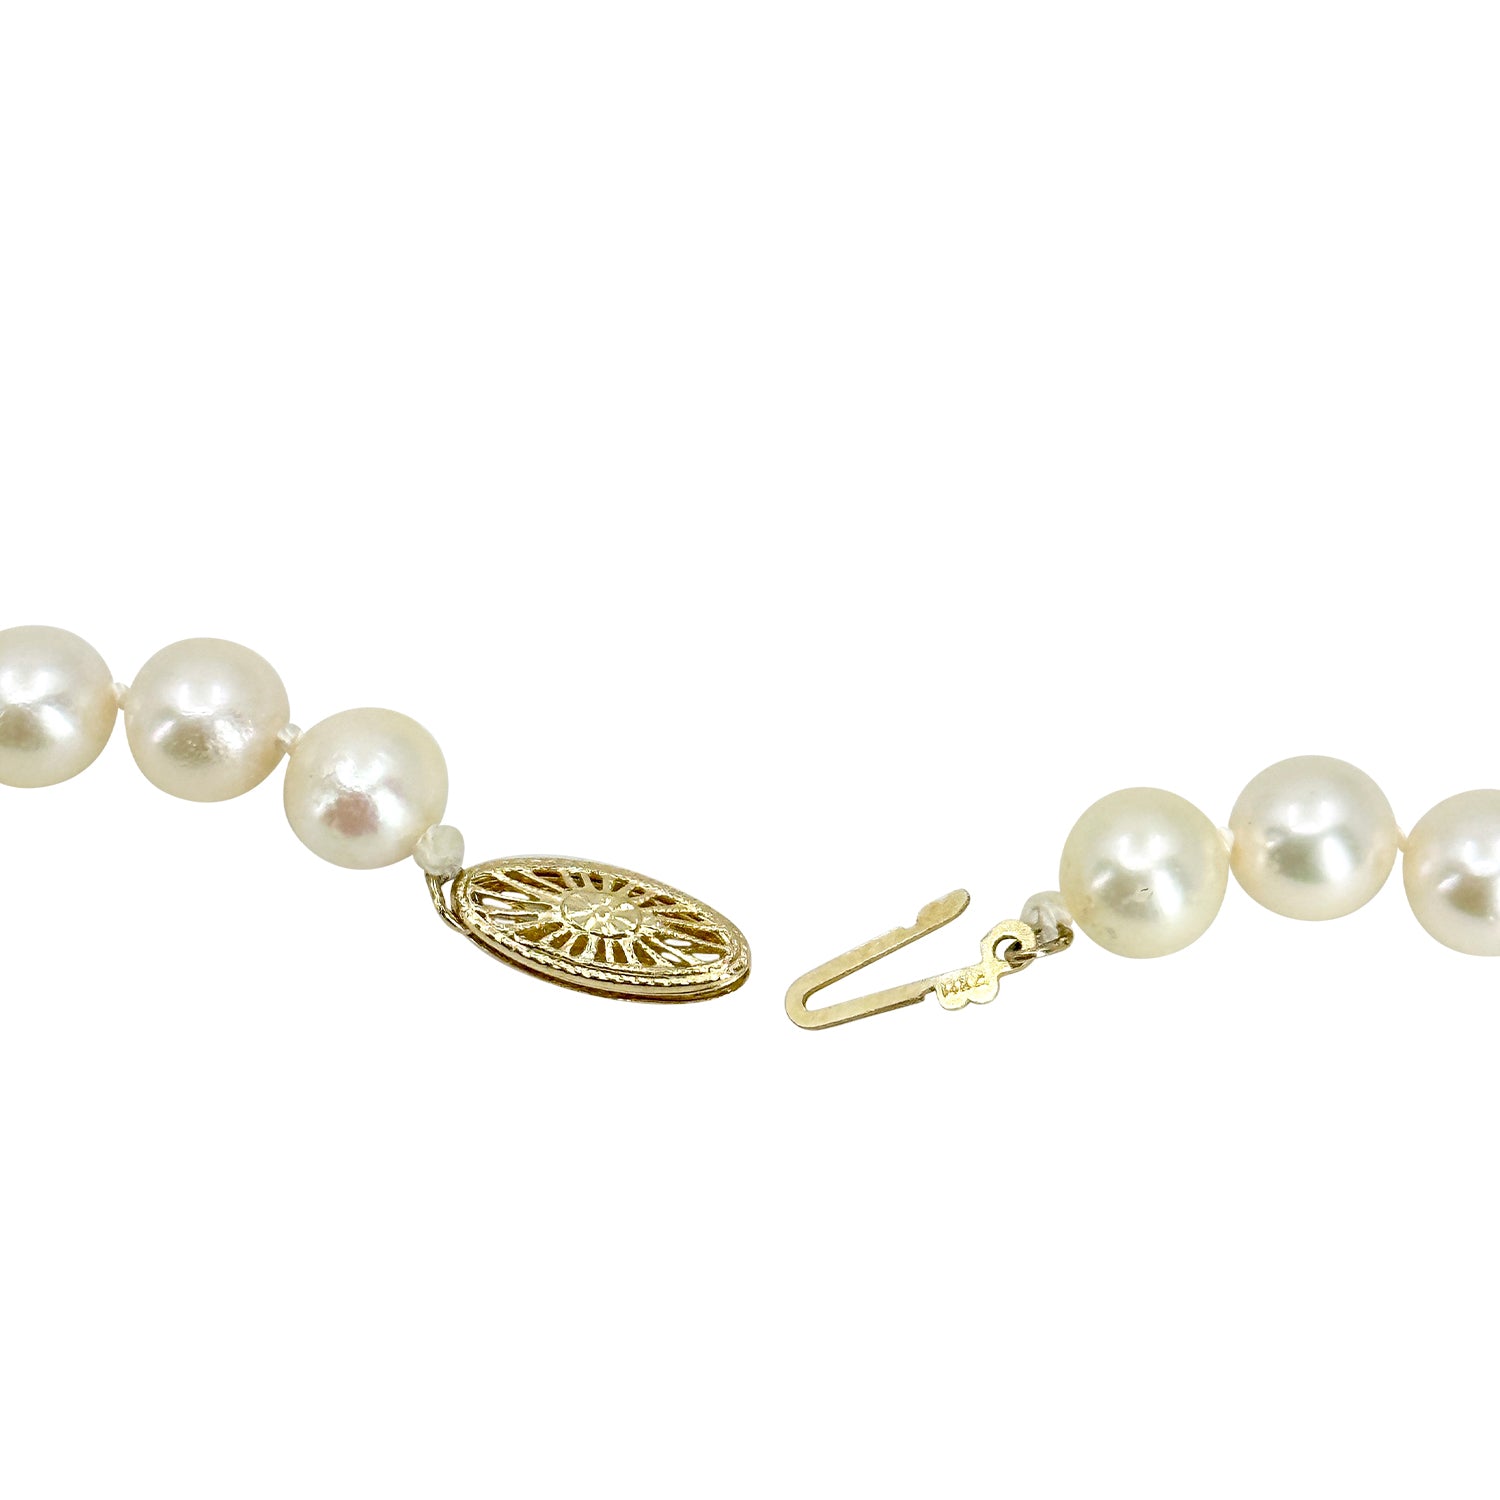 Matinee Filigree Vintage Japanese Cultured Saltwater Akoya Pearl Necklace - 14K Yellow Gold 24 Inch